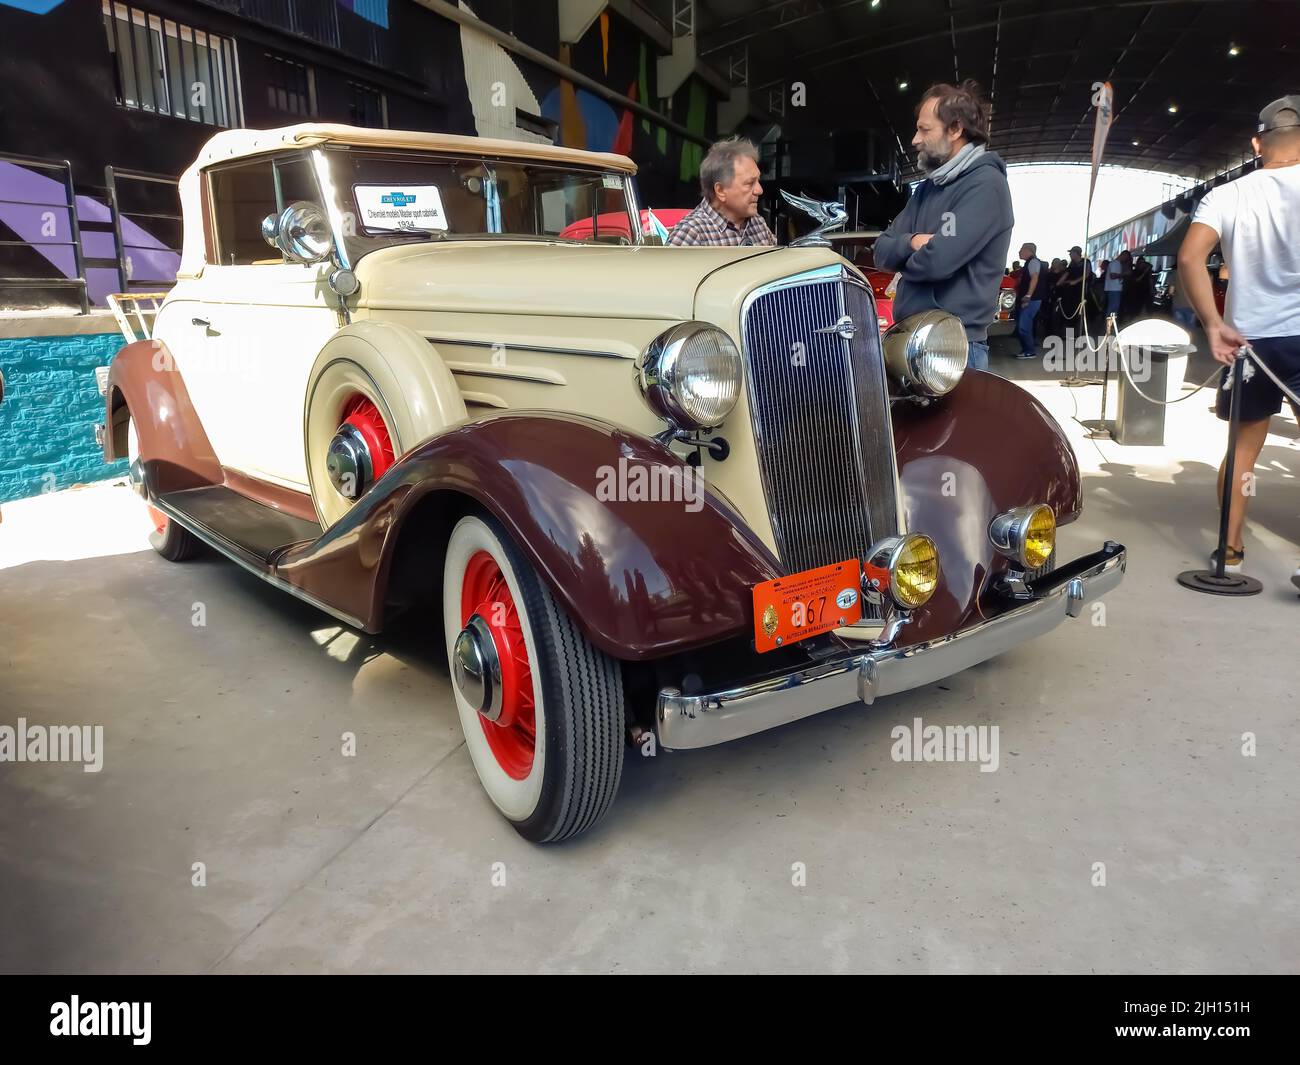 Avellaneda, Argentina - May 8, 2022: vintage beige brown 1934 Chevrolet Chevy Master cabriolet by GM. Expo Fierro 2022 classic car show Stock Photo